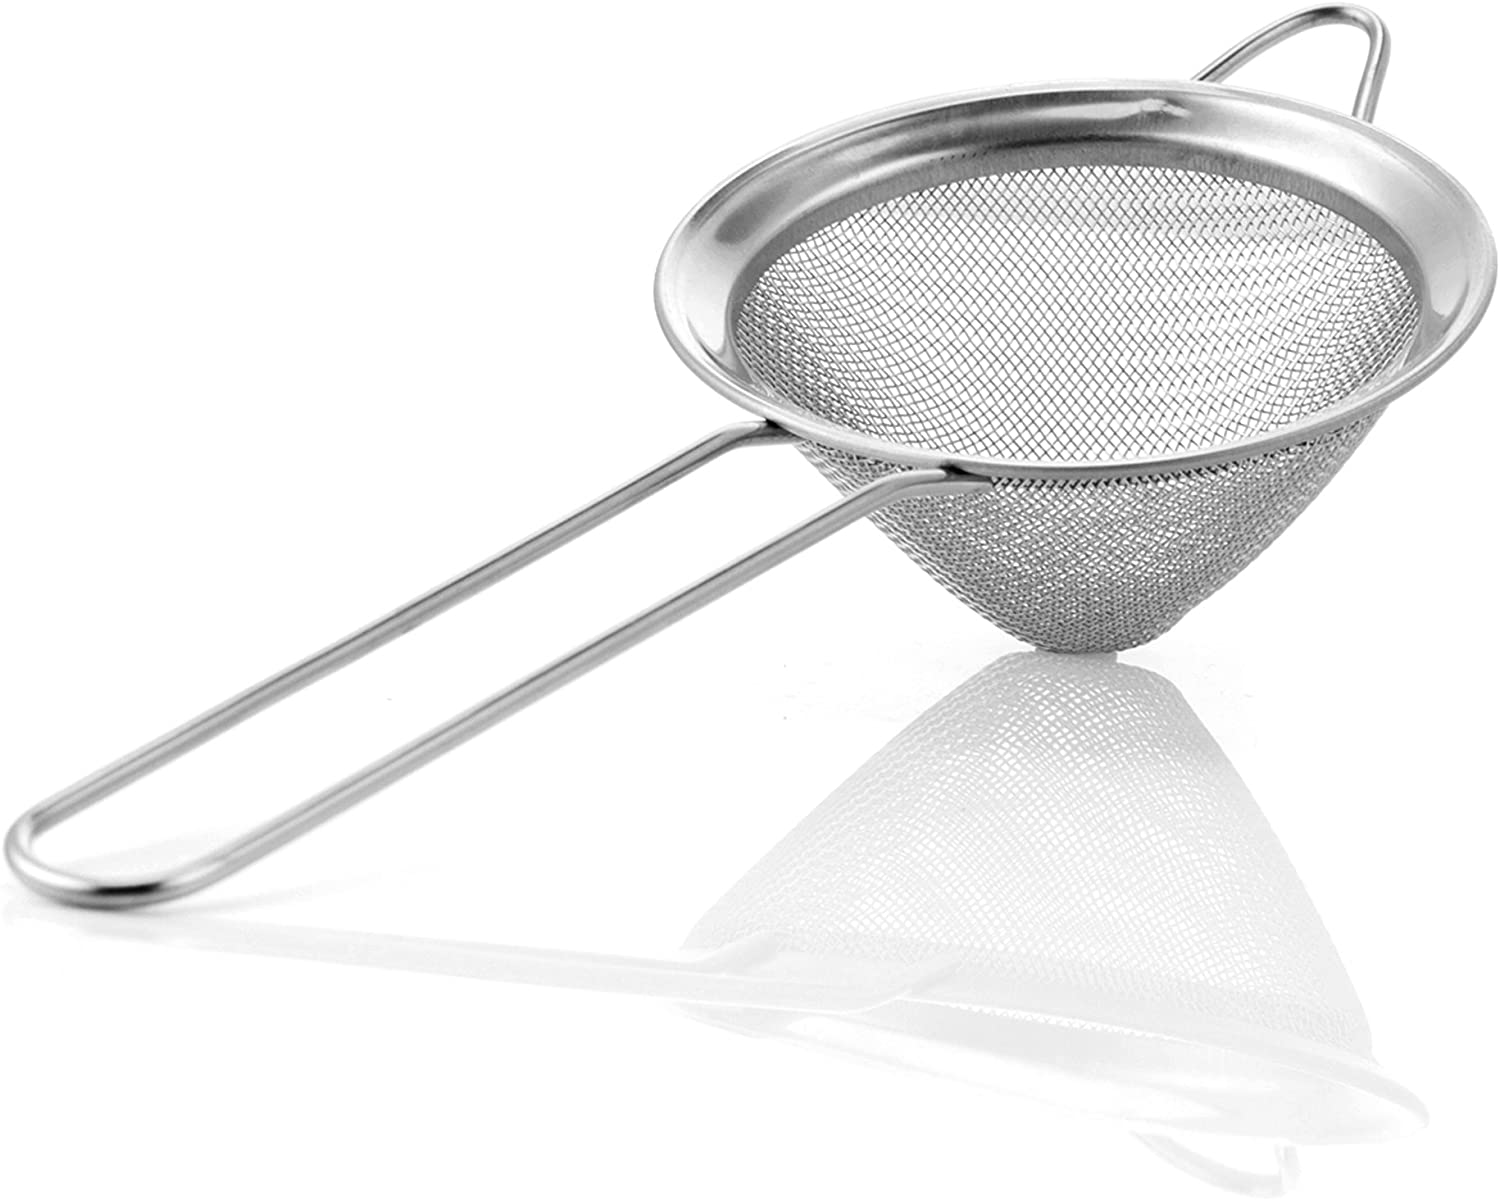 kitchen sink sieve for coffee grounds